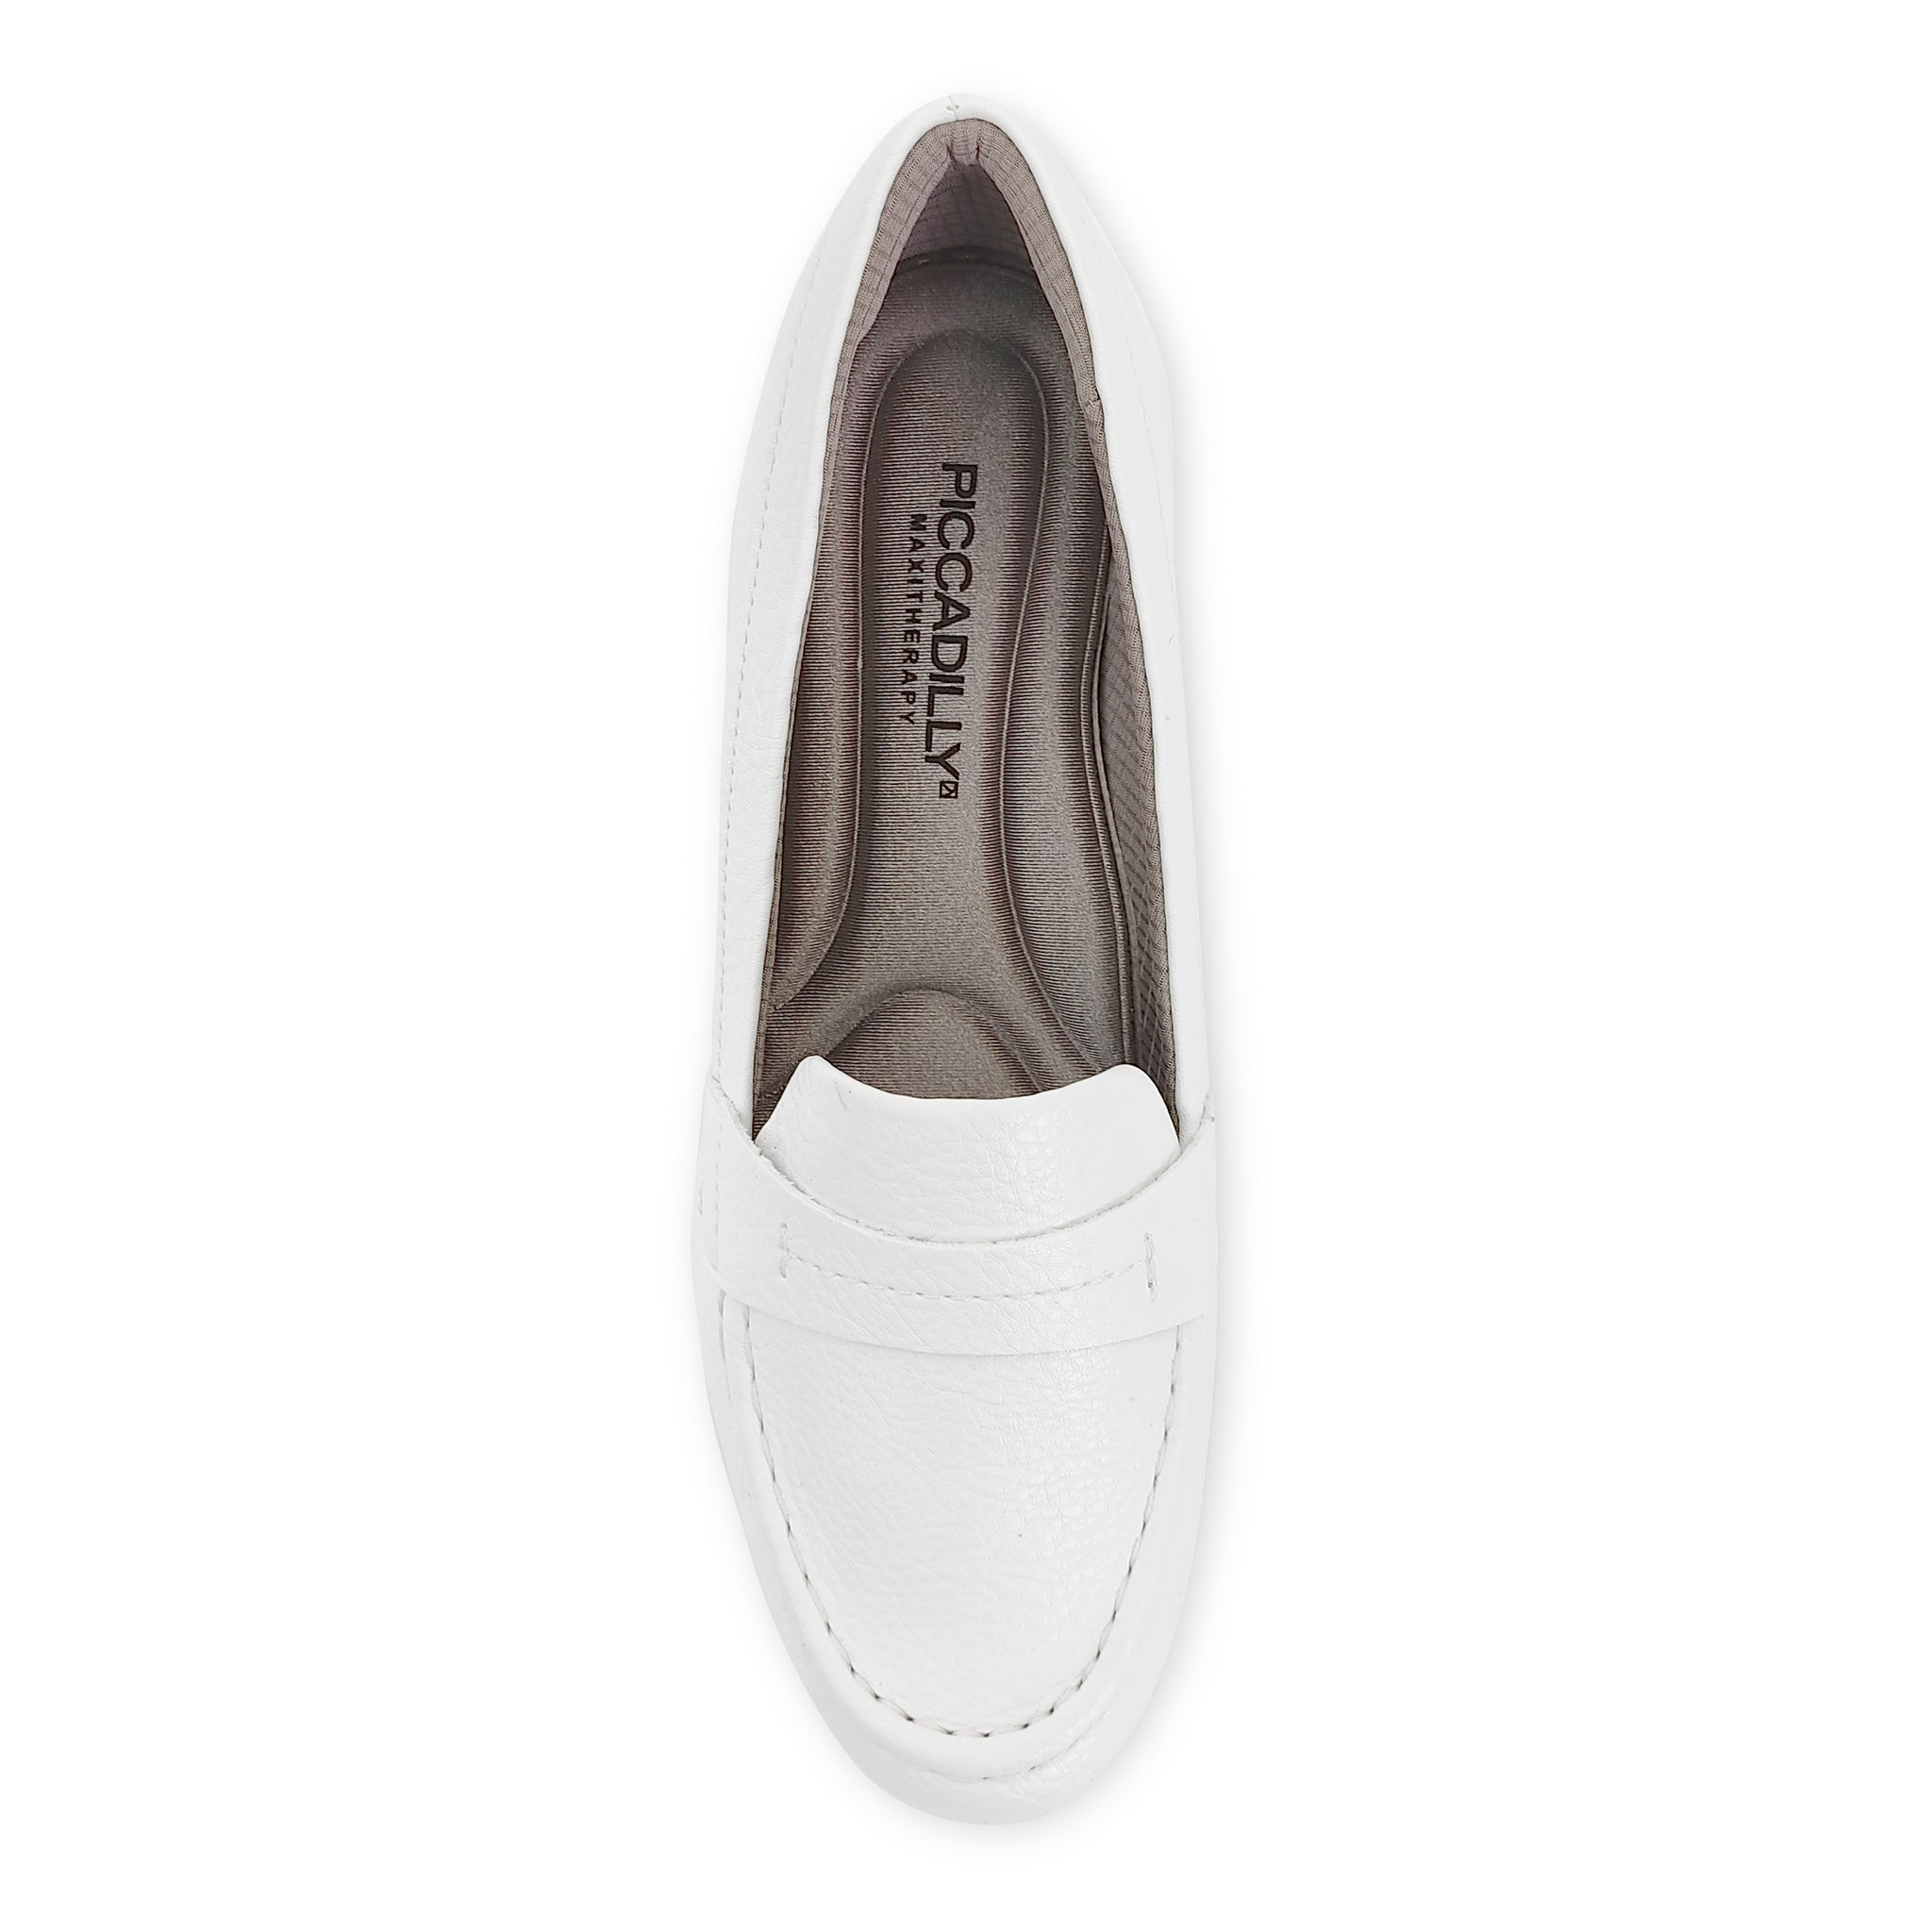 white wedge shoes womens